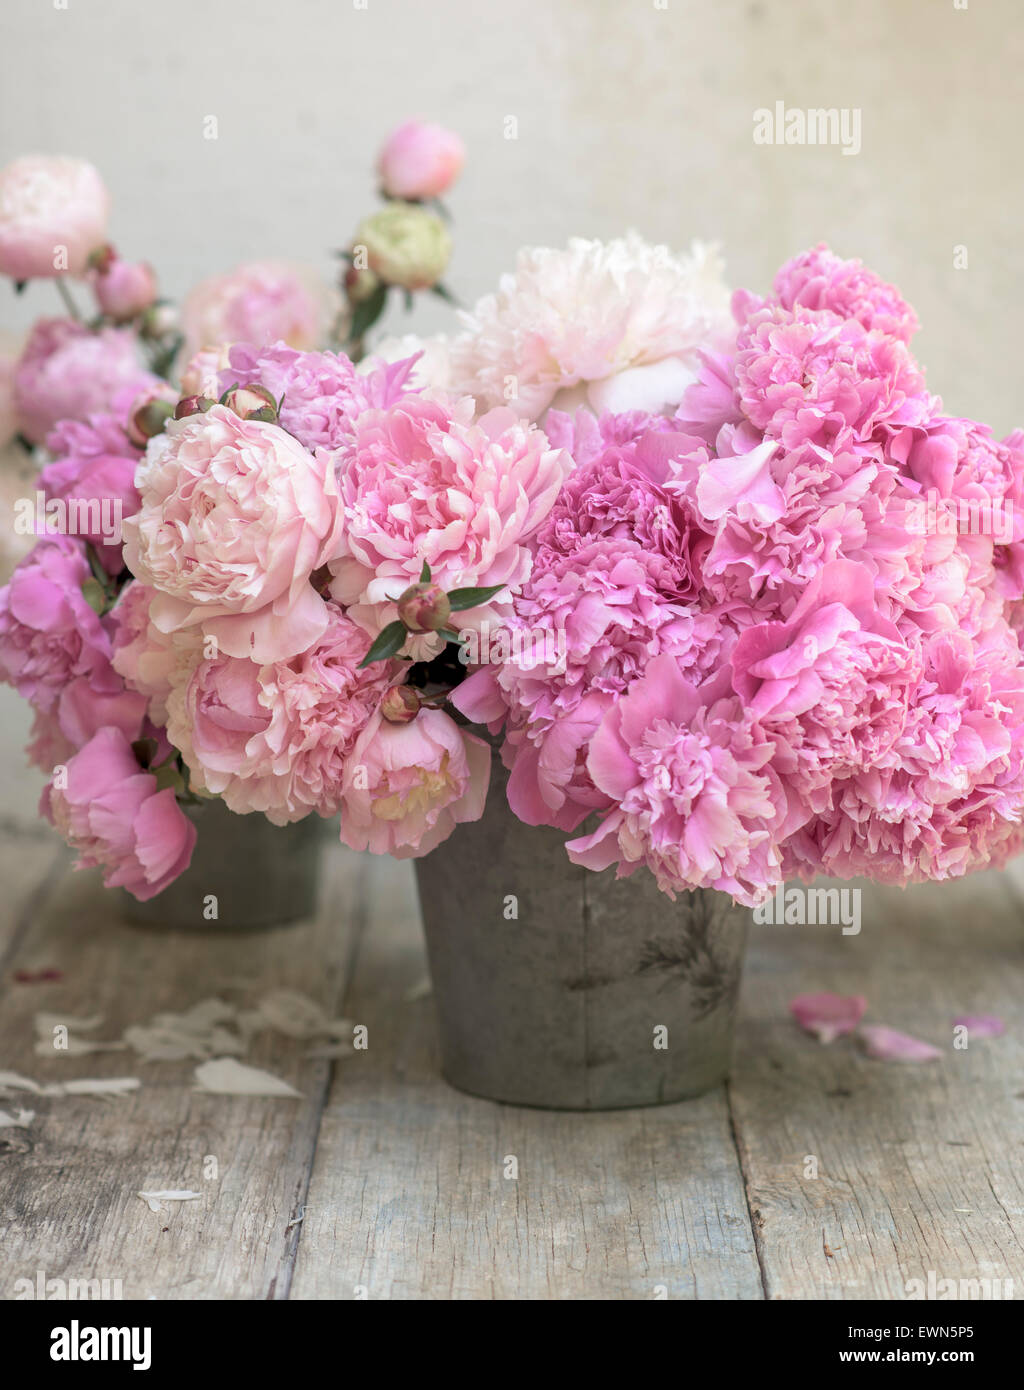 Bouquet of mixed pink and white peonies in container Stock Photo